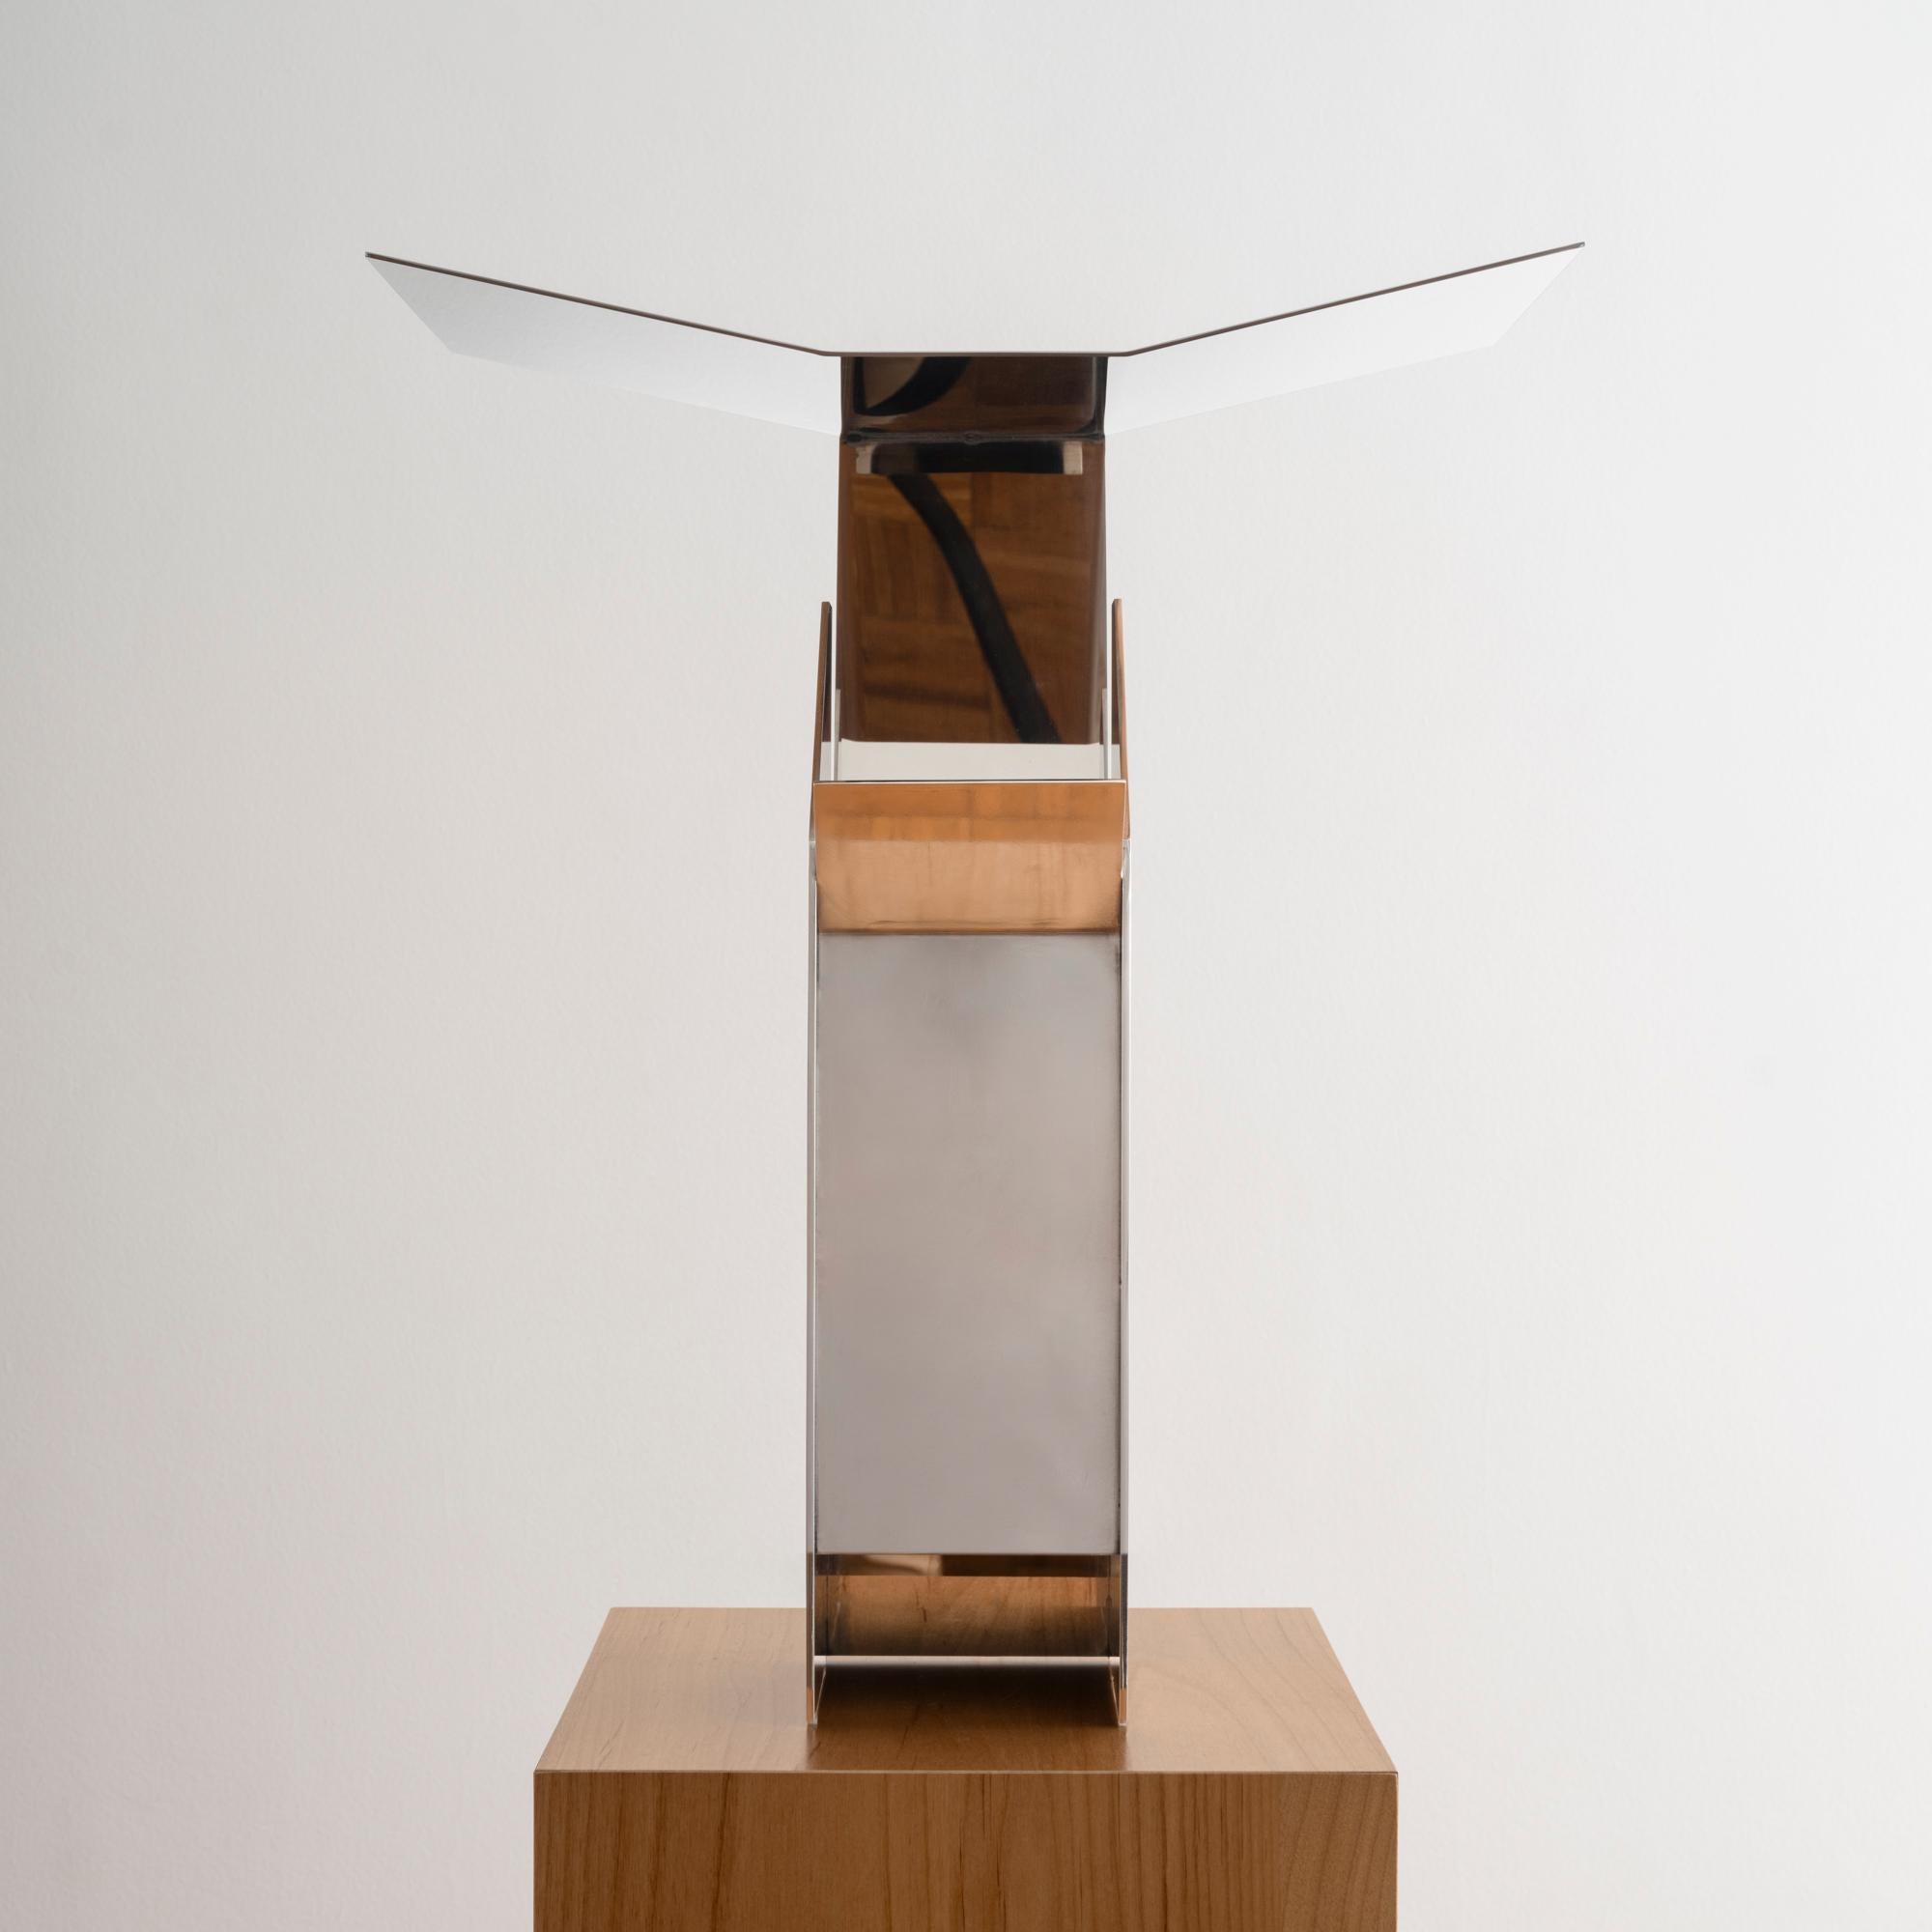 Machine Age Contemporary Folded Steel Table Lamp by EJR Barnes 